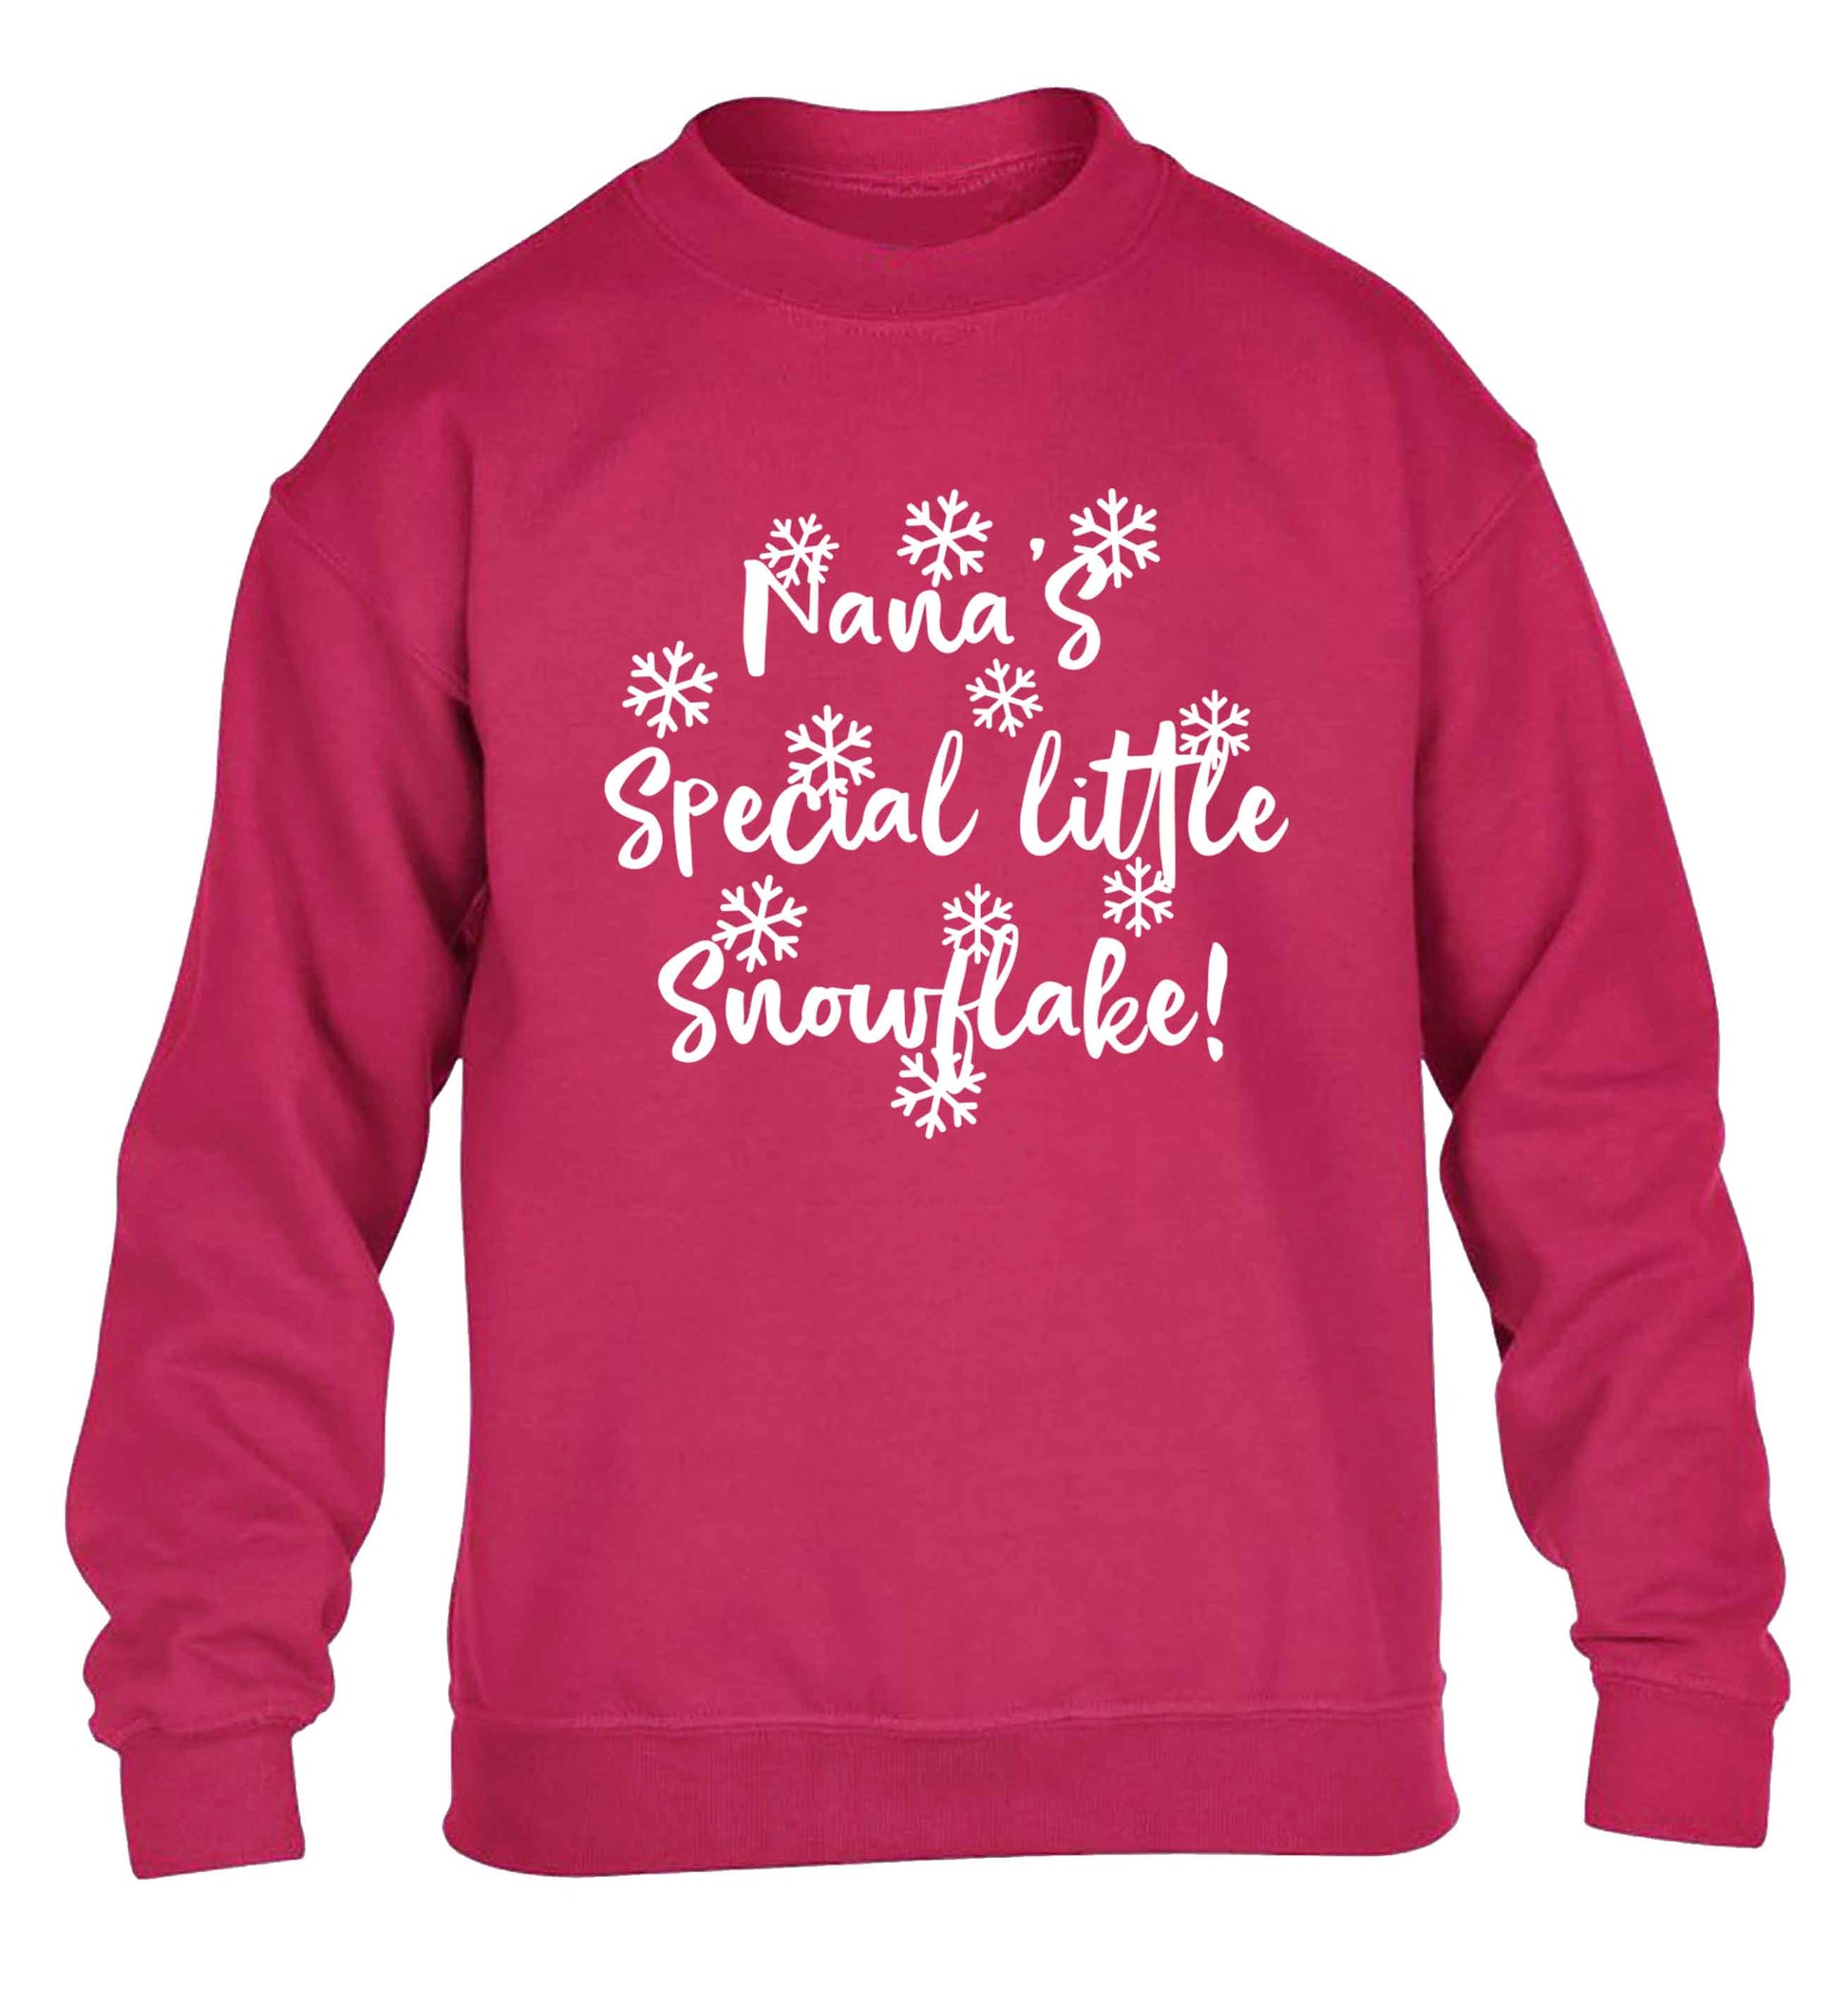 Nana's special little snowflake children's pink sweater 12-13 Years